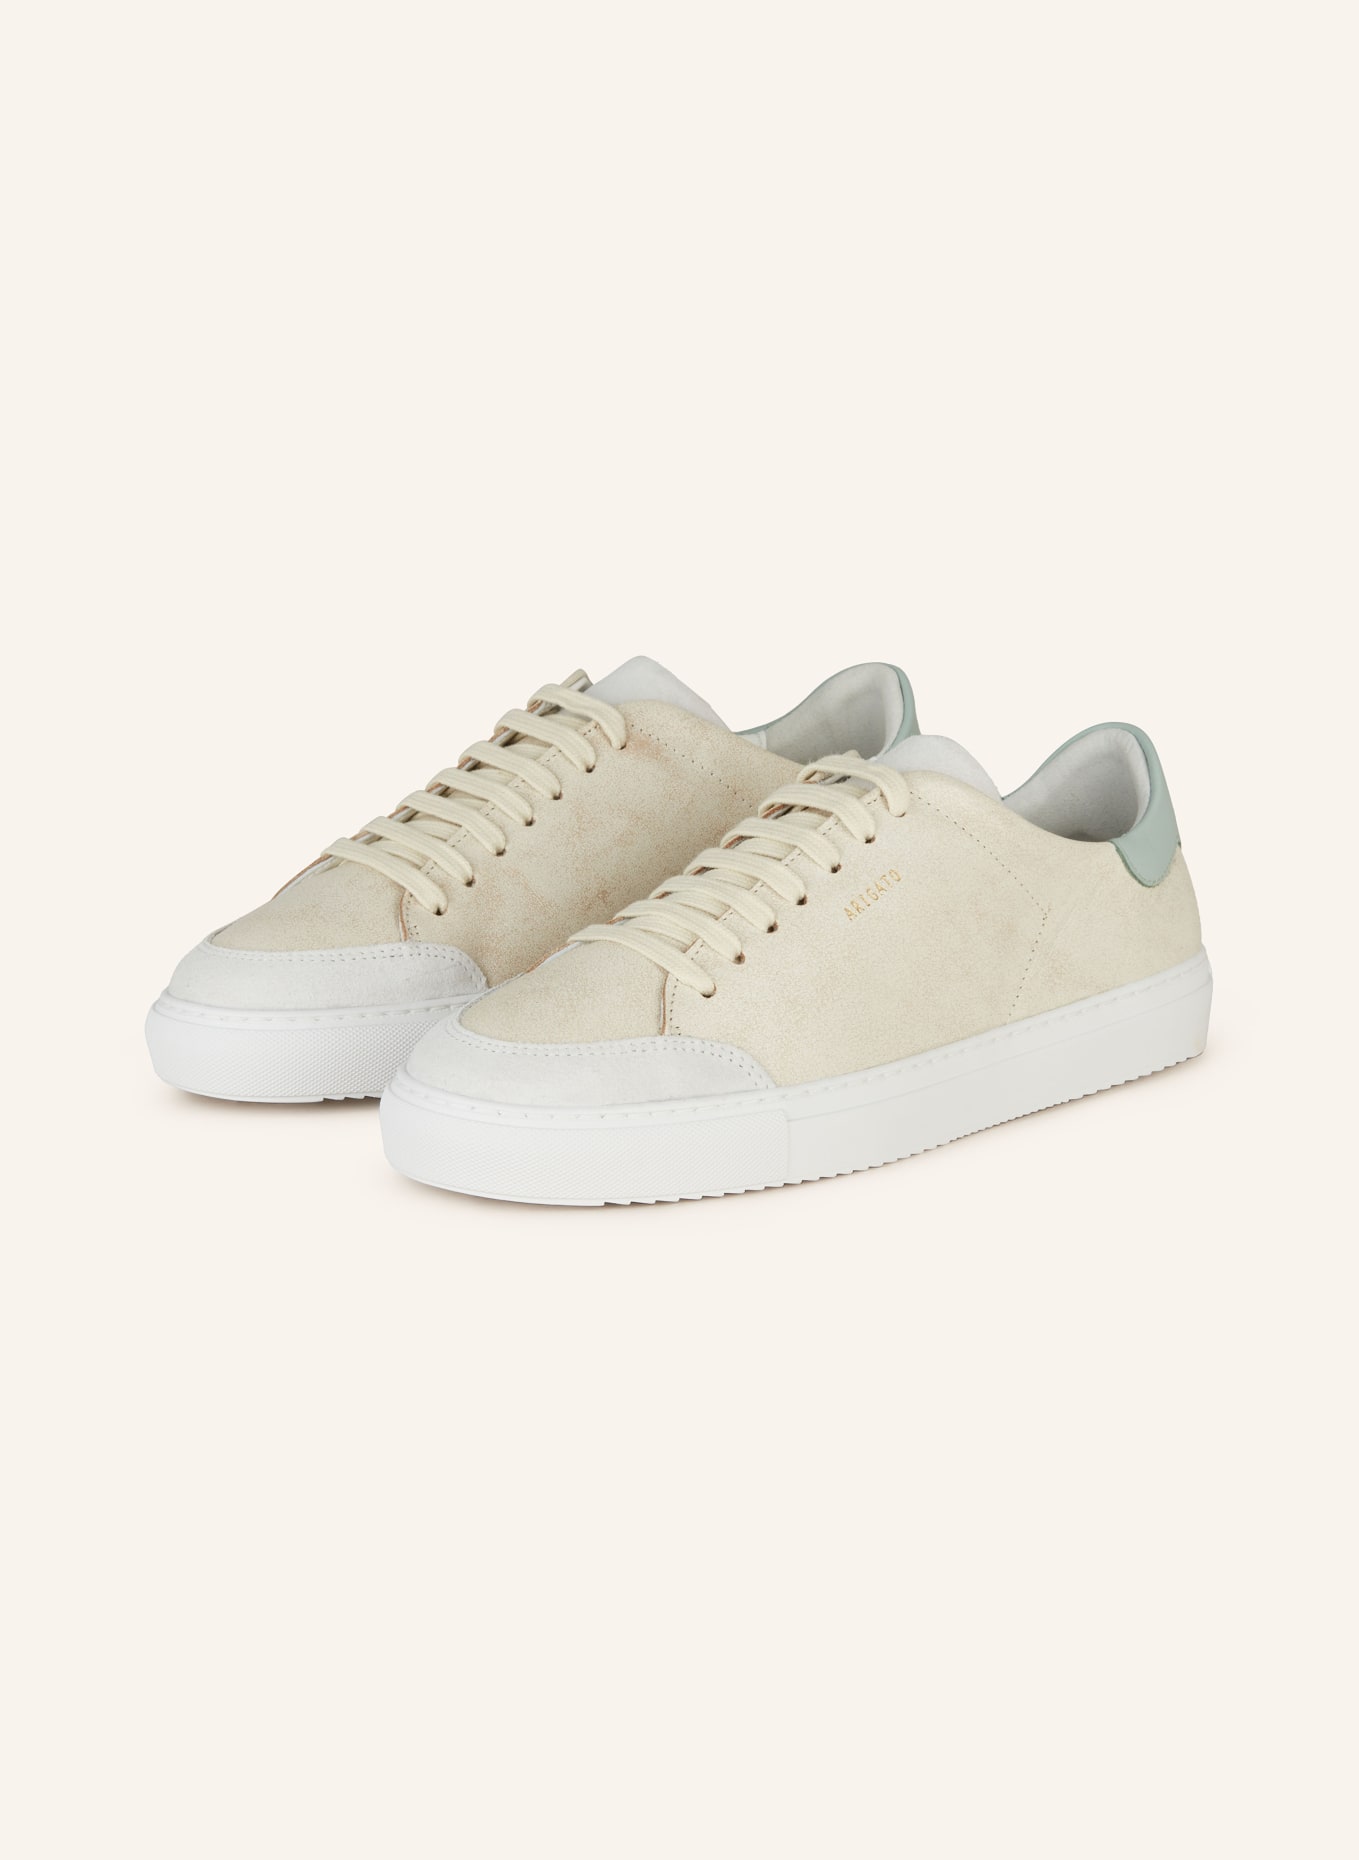 AXEL ARIGATO Sneakers CLEAN, Color: BEIGE/ LIGHT GRAY (Image 1)